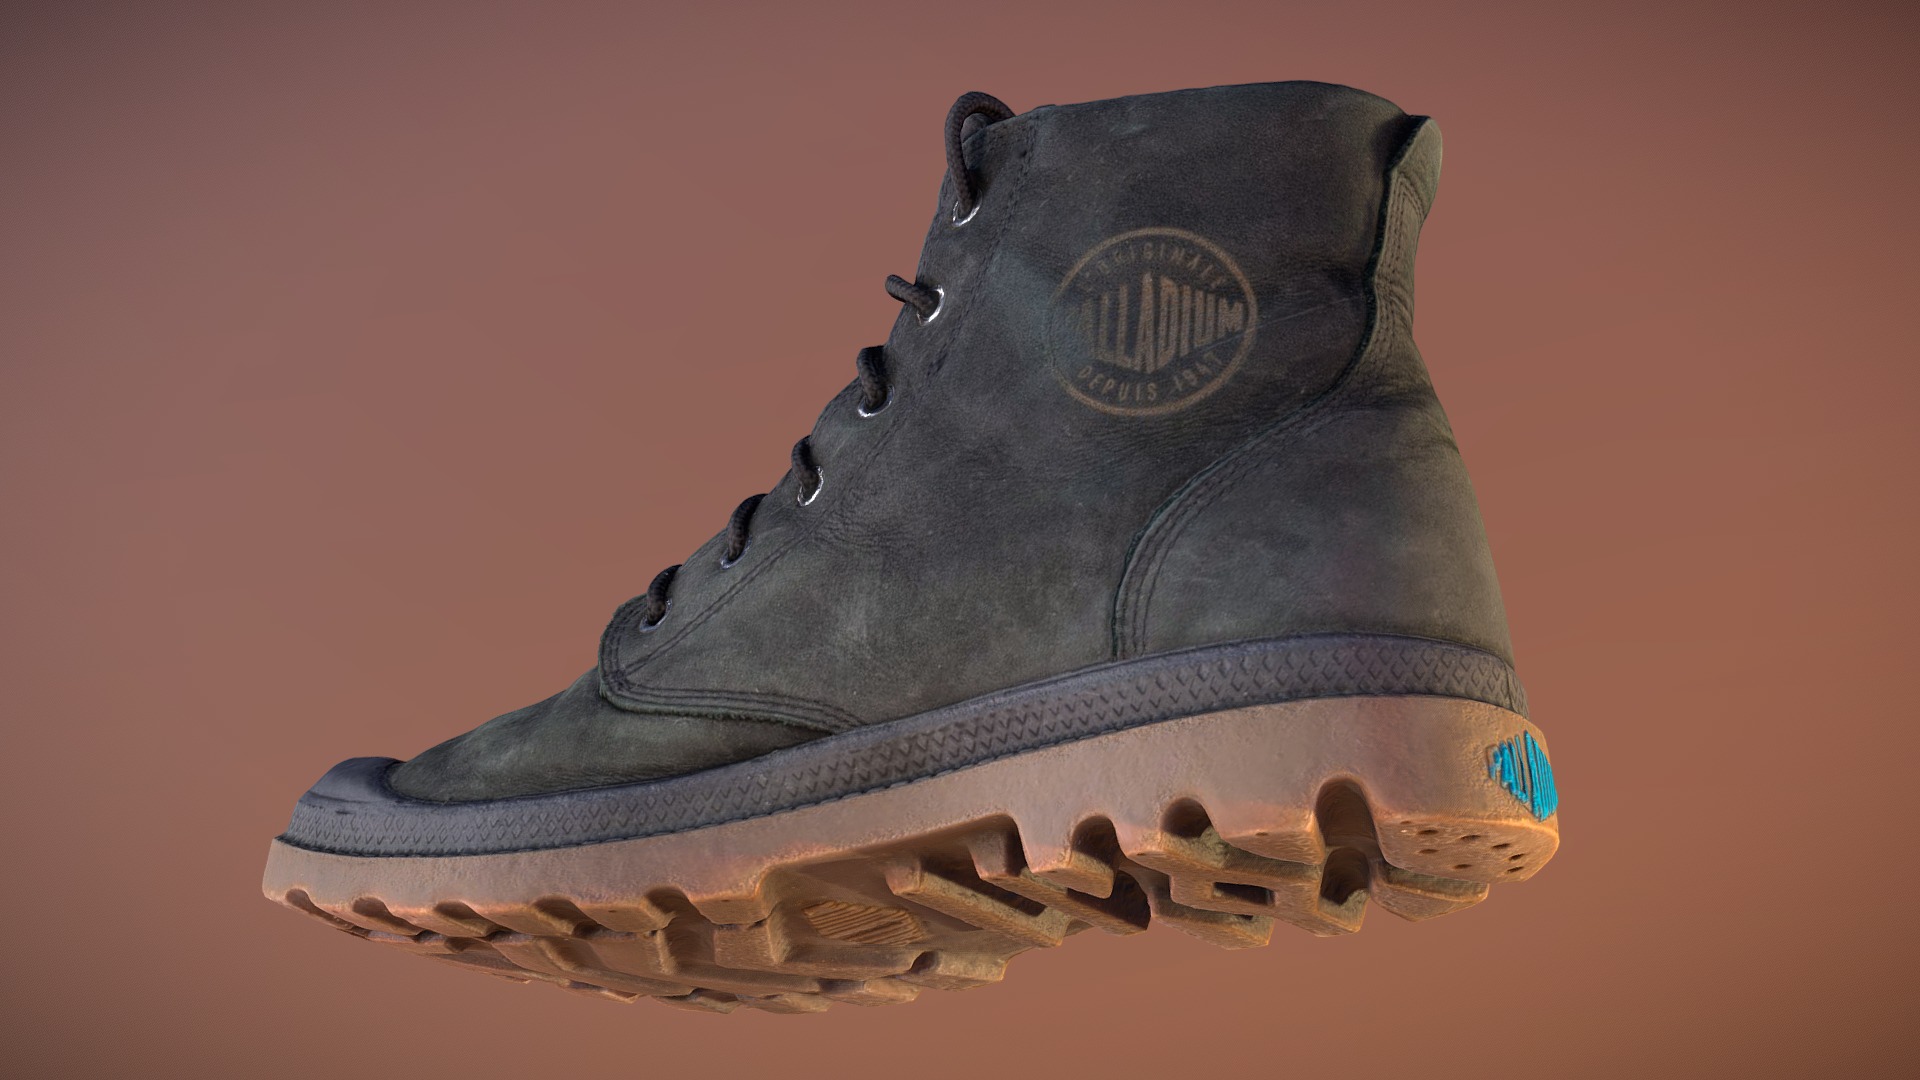 3D model Palladium Boot - This is a 3D model of the Palladium Boot. The 3D model is about a black and grey shoe.